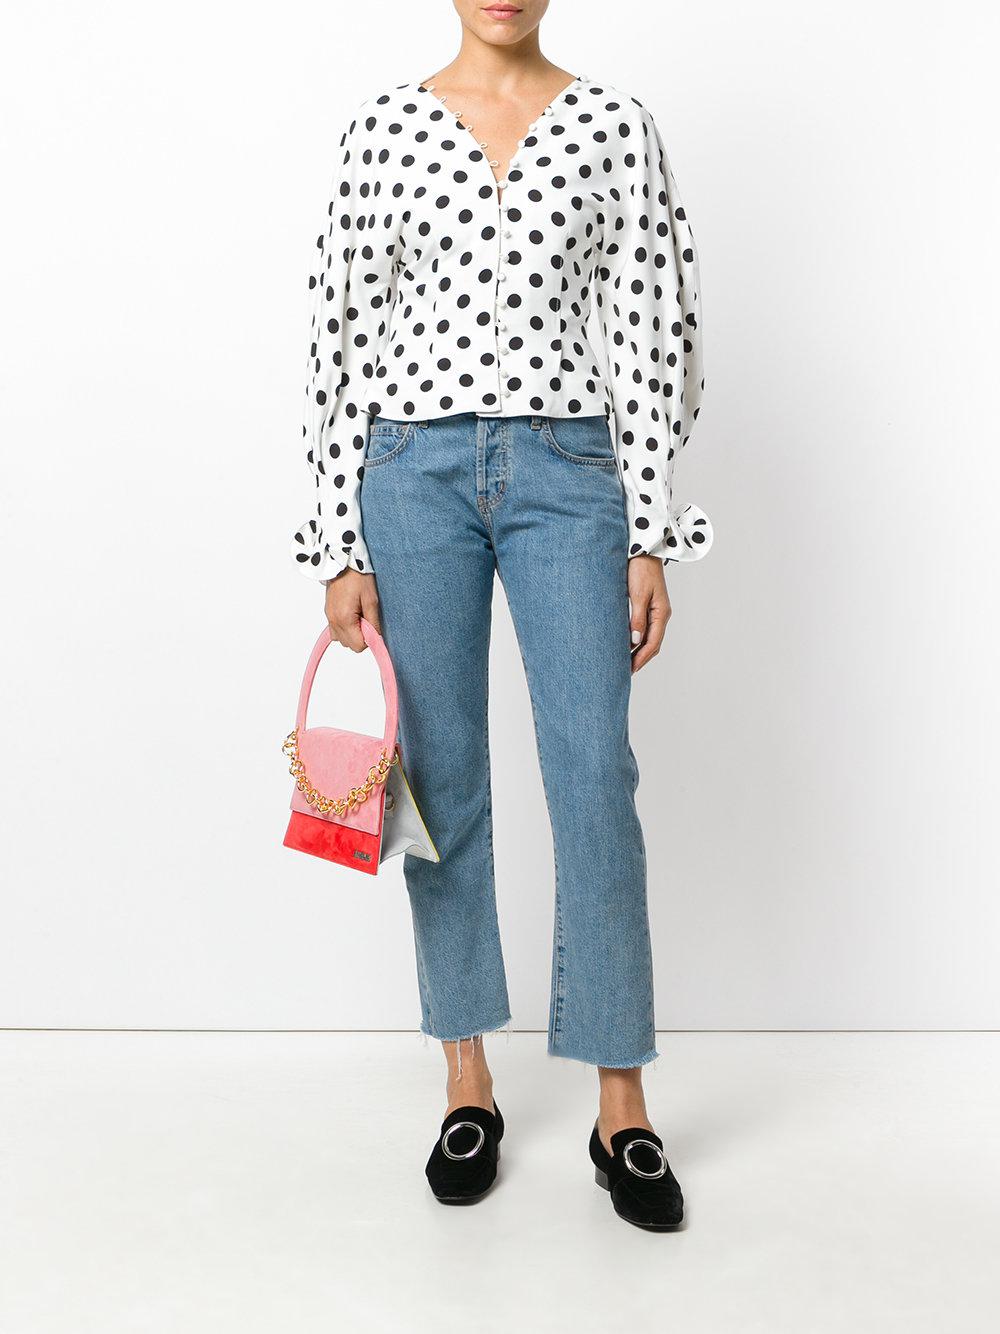 Jacquemus Polka Dot Button Up Blouse in White - Lyst